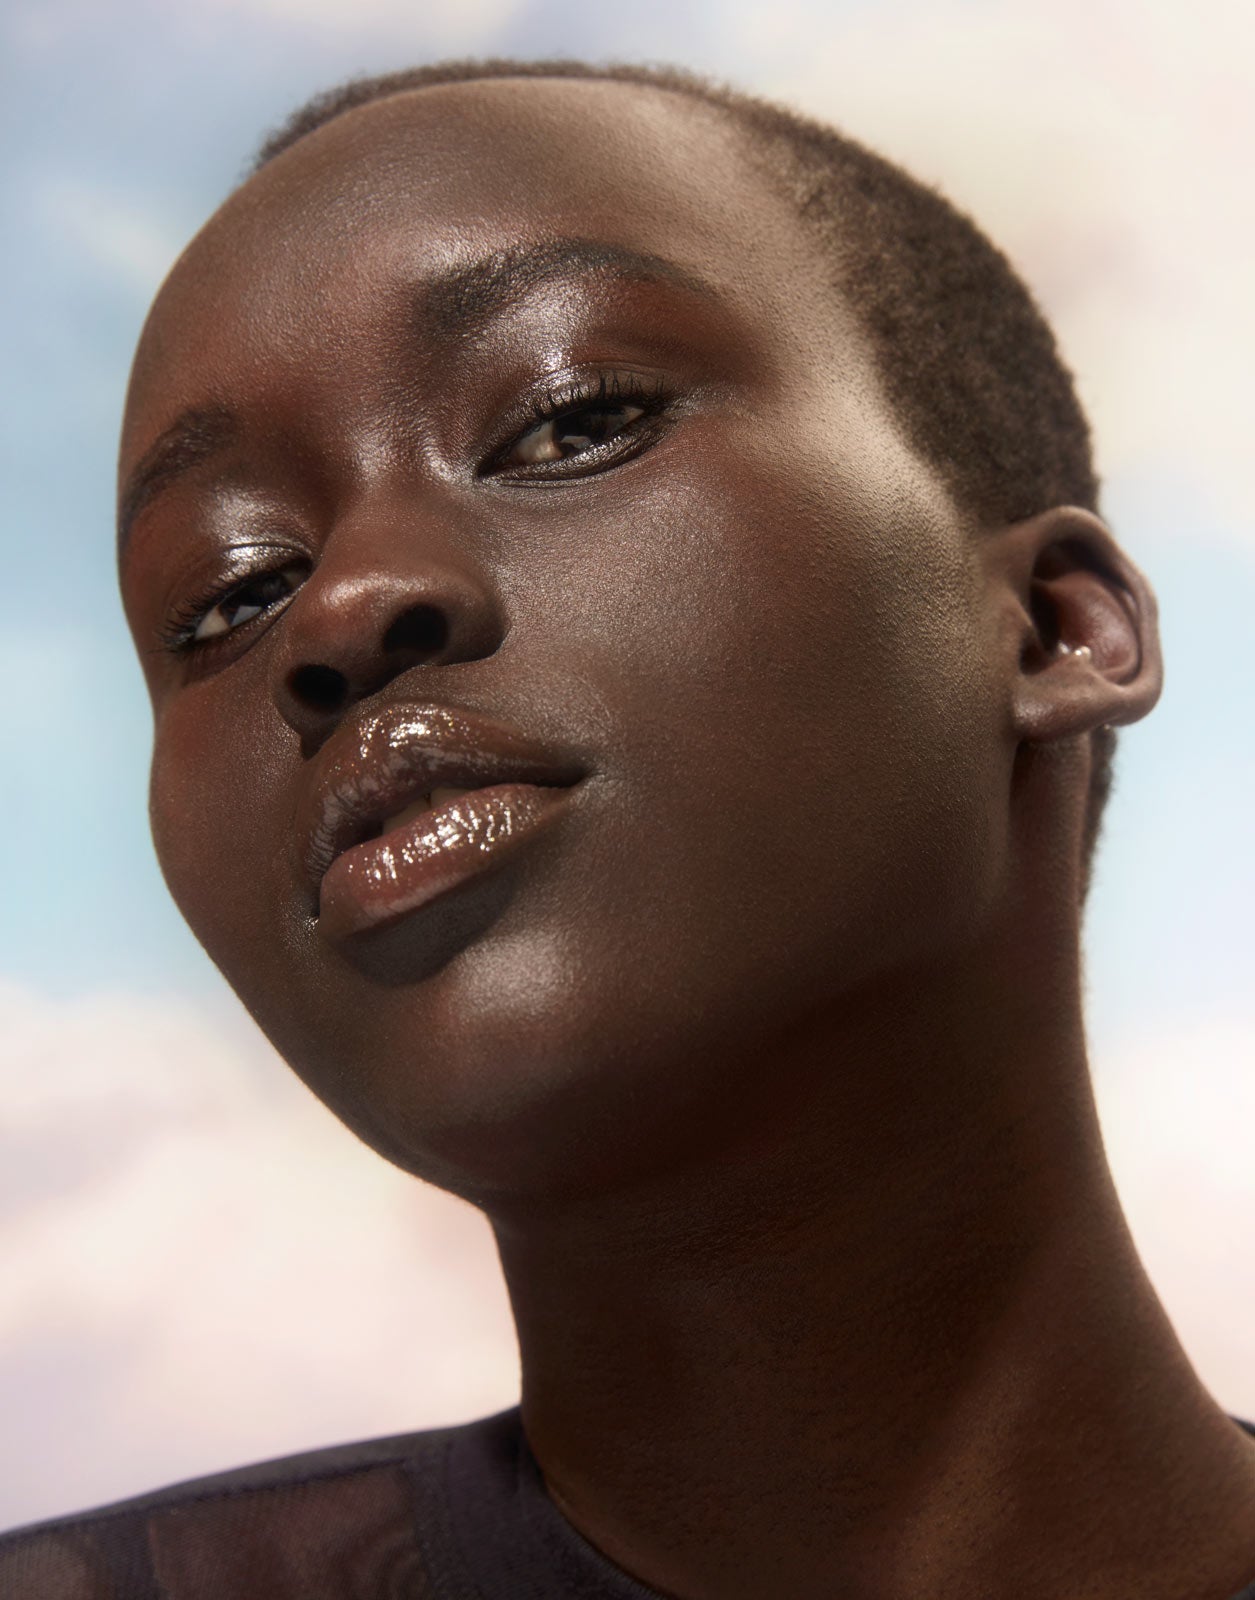 Model wearing shade 001 with a full fave of make up. For deep skin with neutral undertones